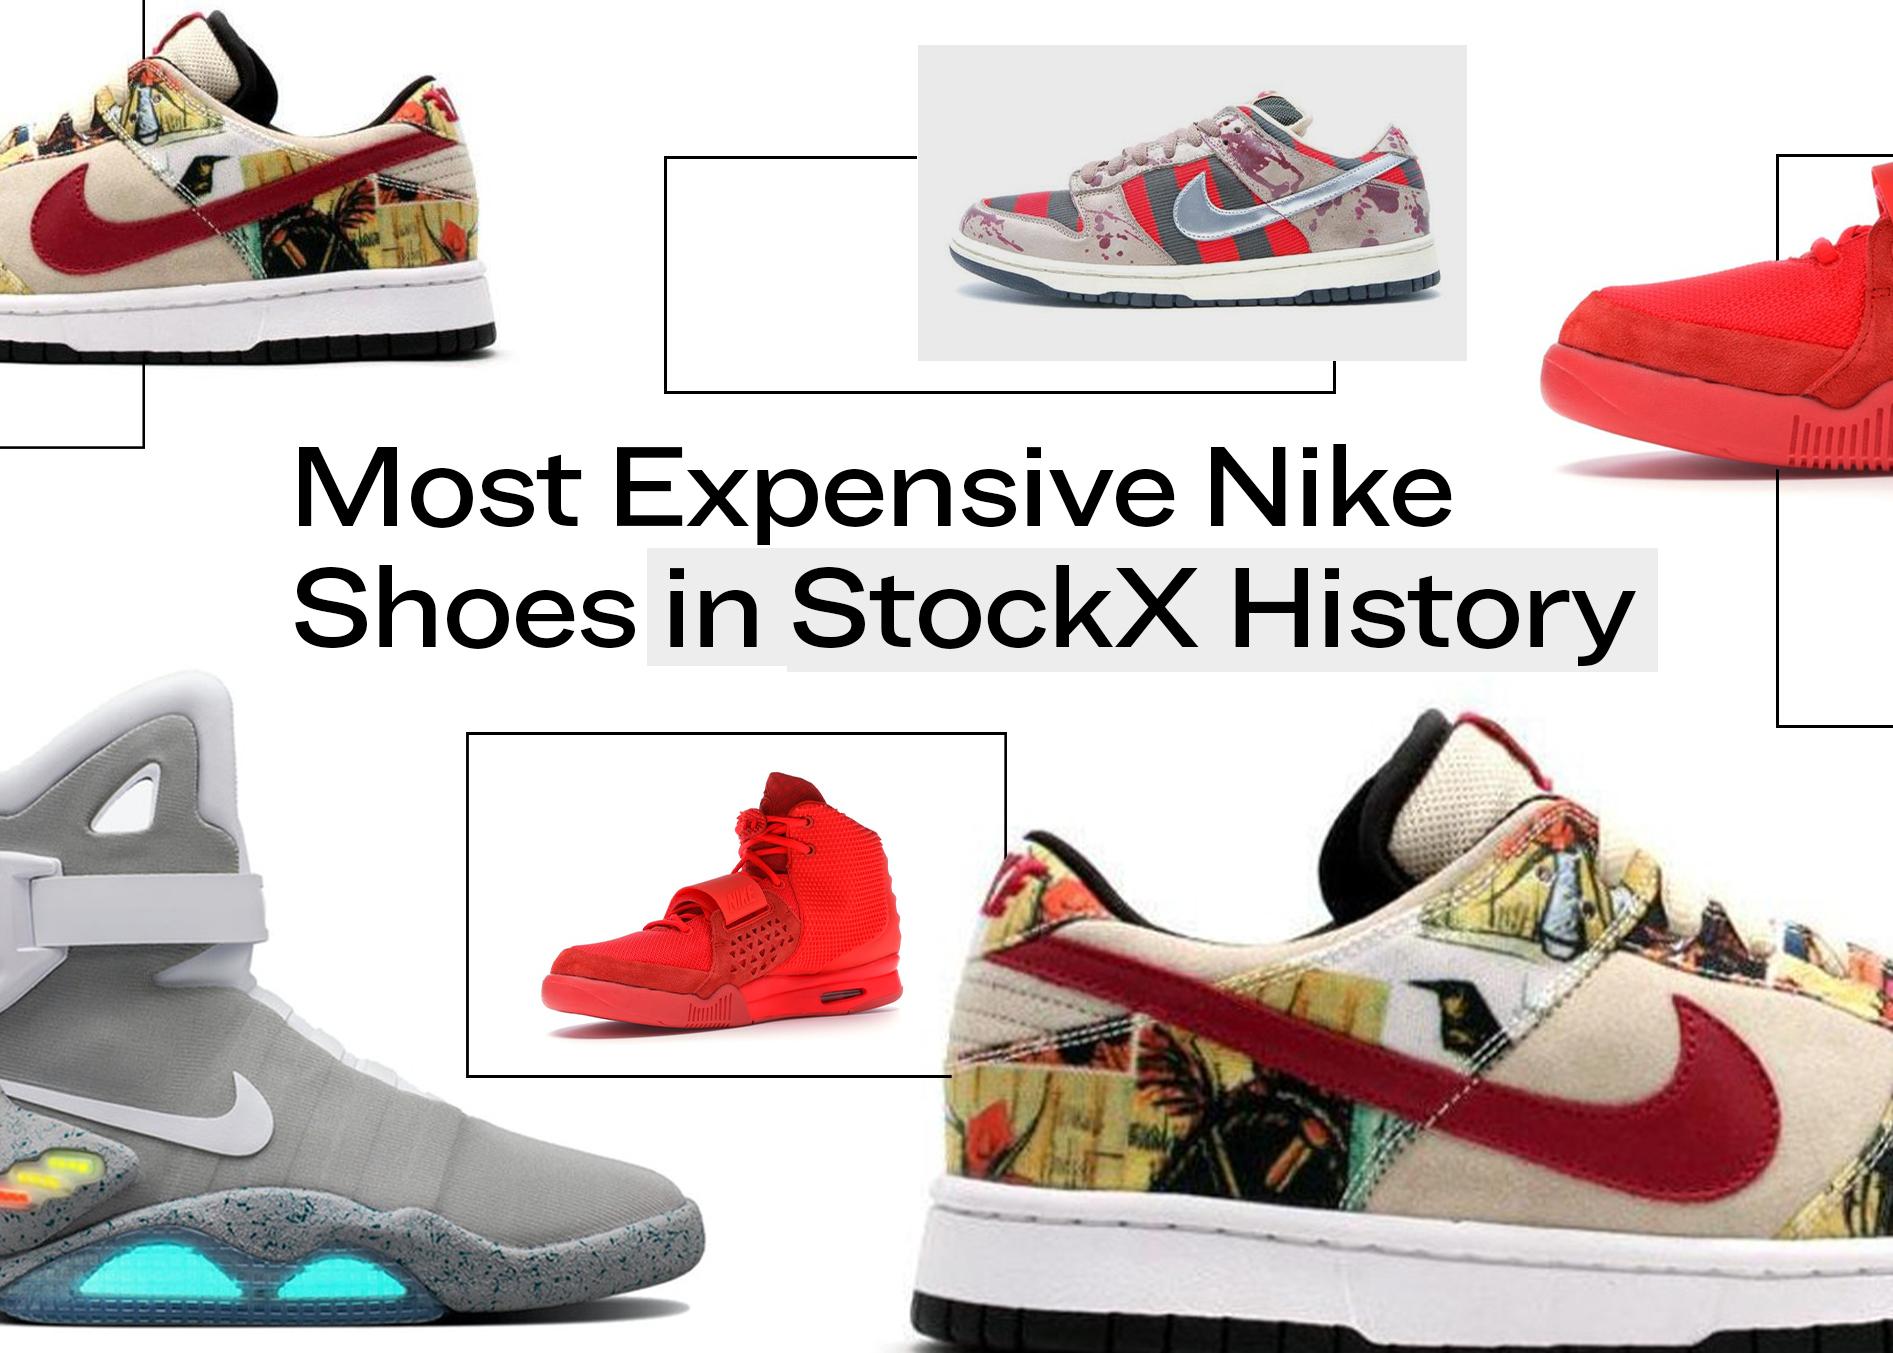 10 Most Expensive Nike Shoes